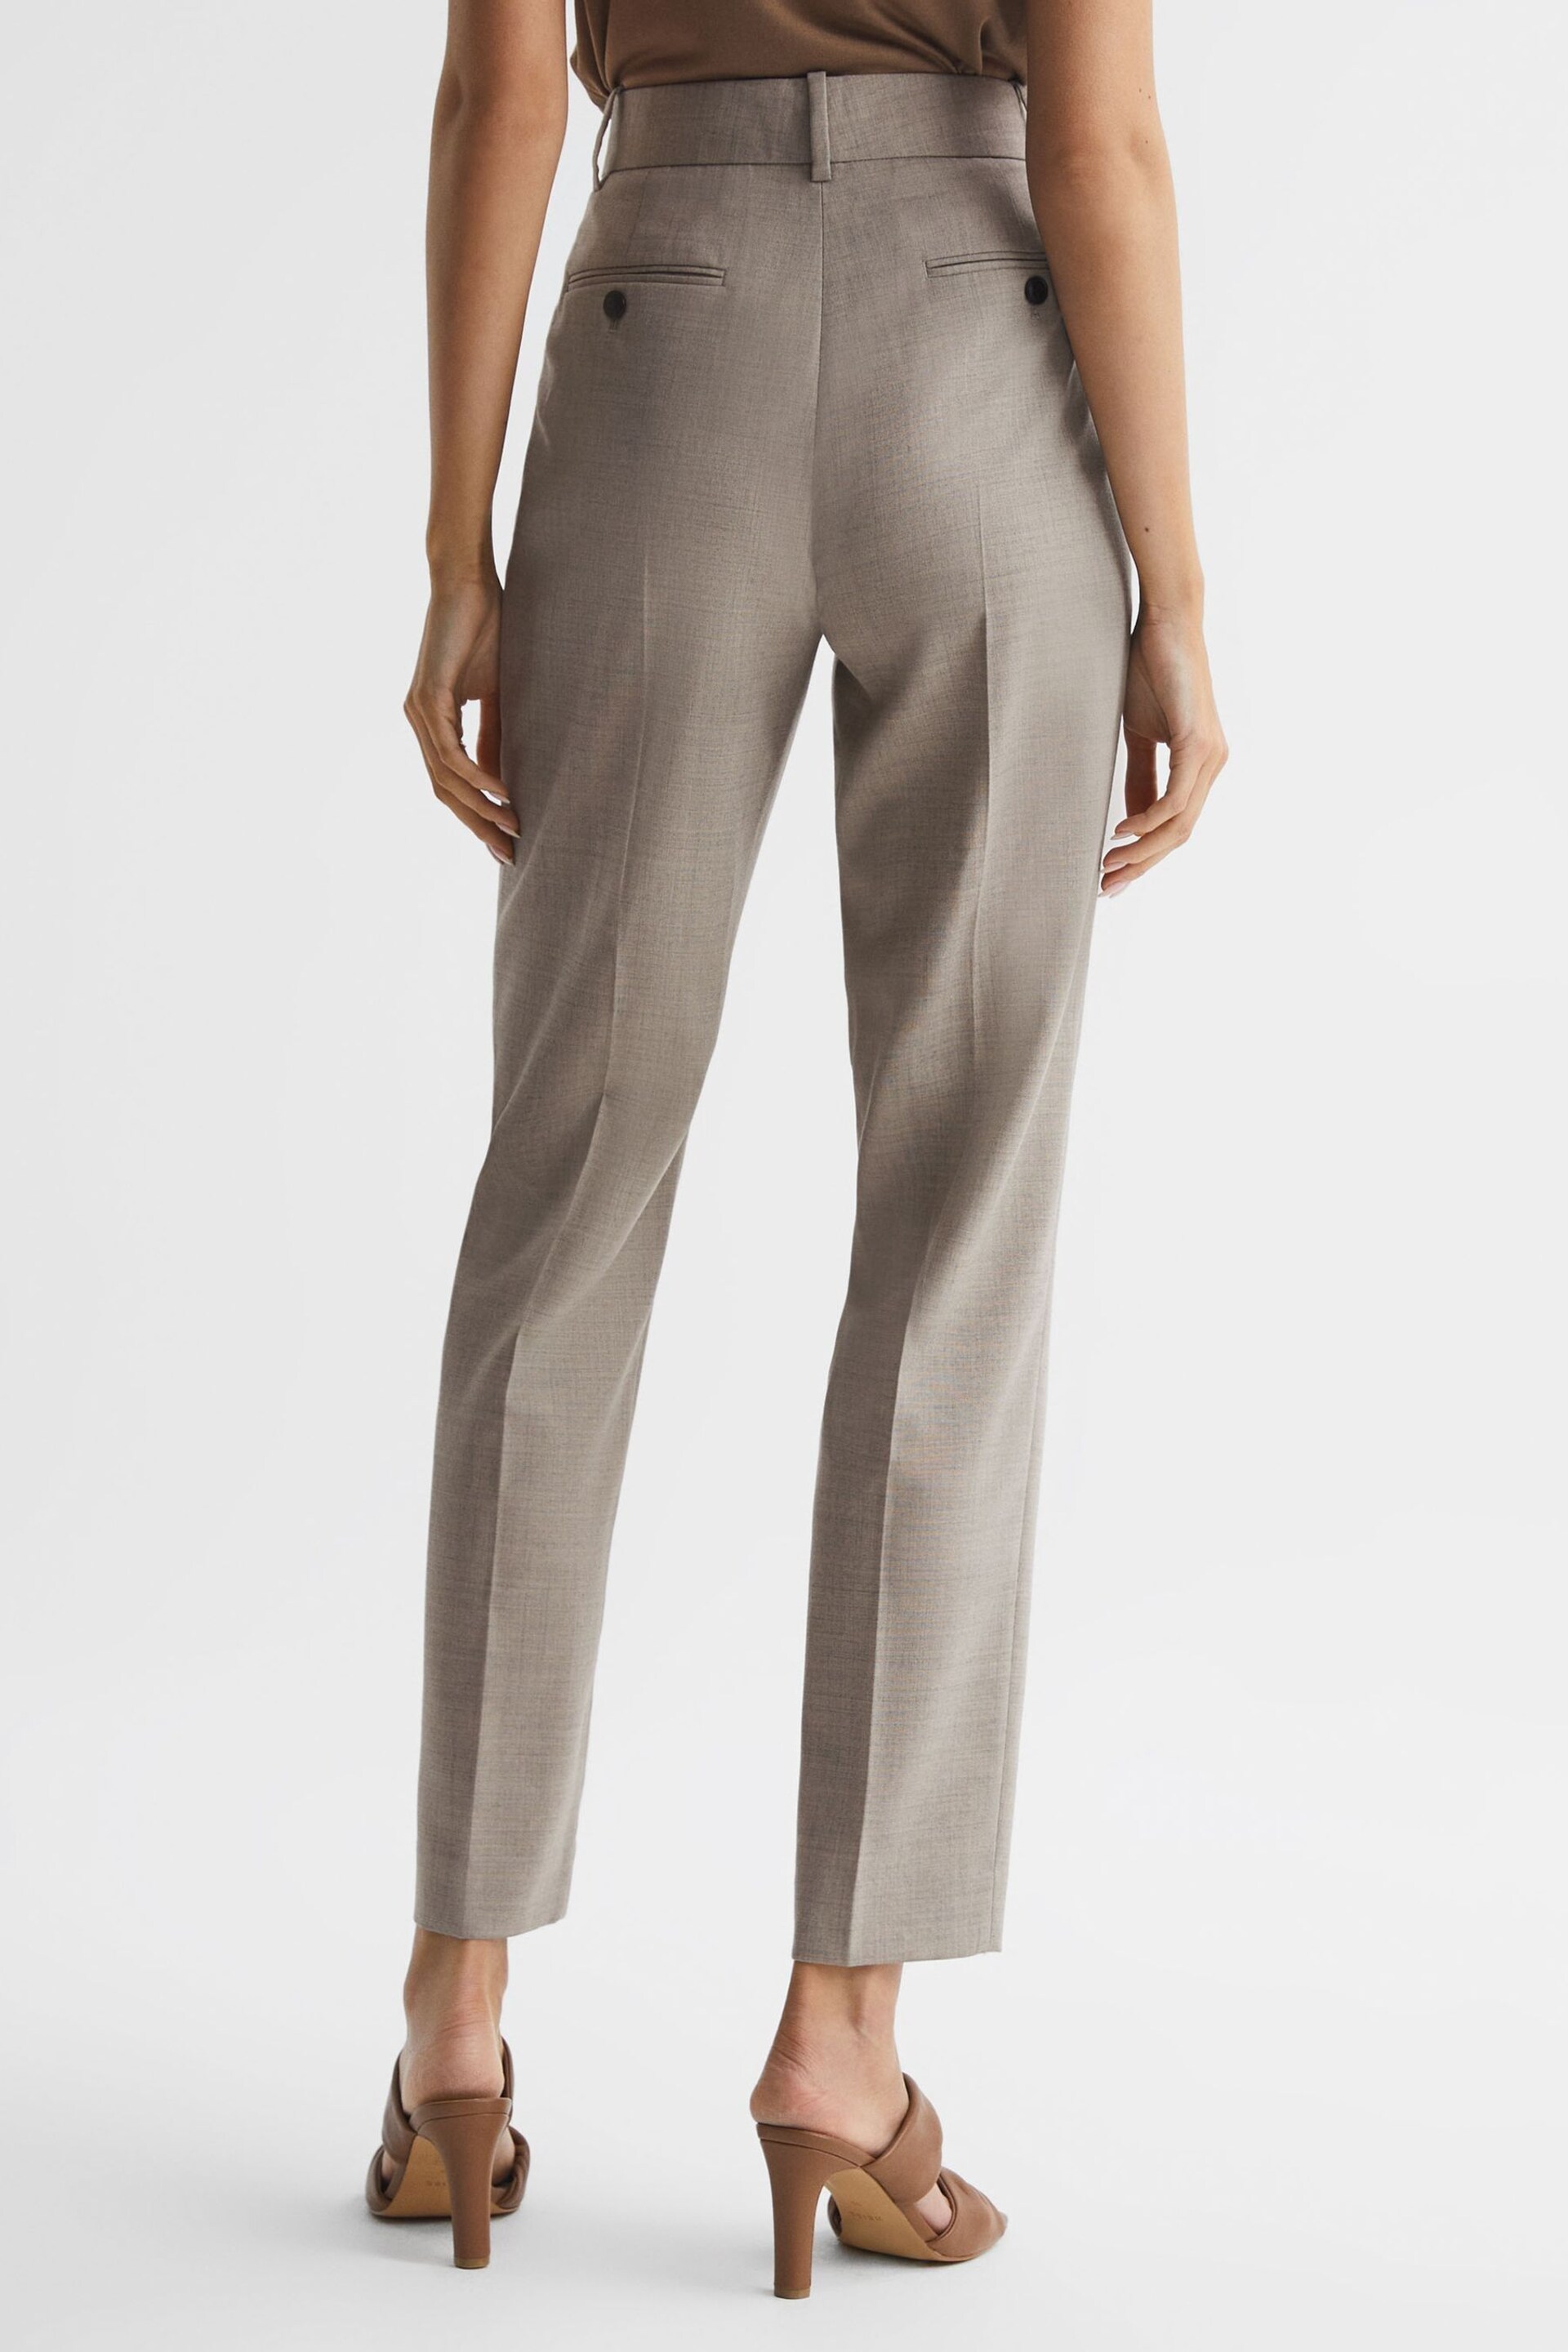 Reiss Oatmeal Emily Straight Leg Tailored Trousers - Image 5 of 6